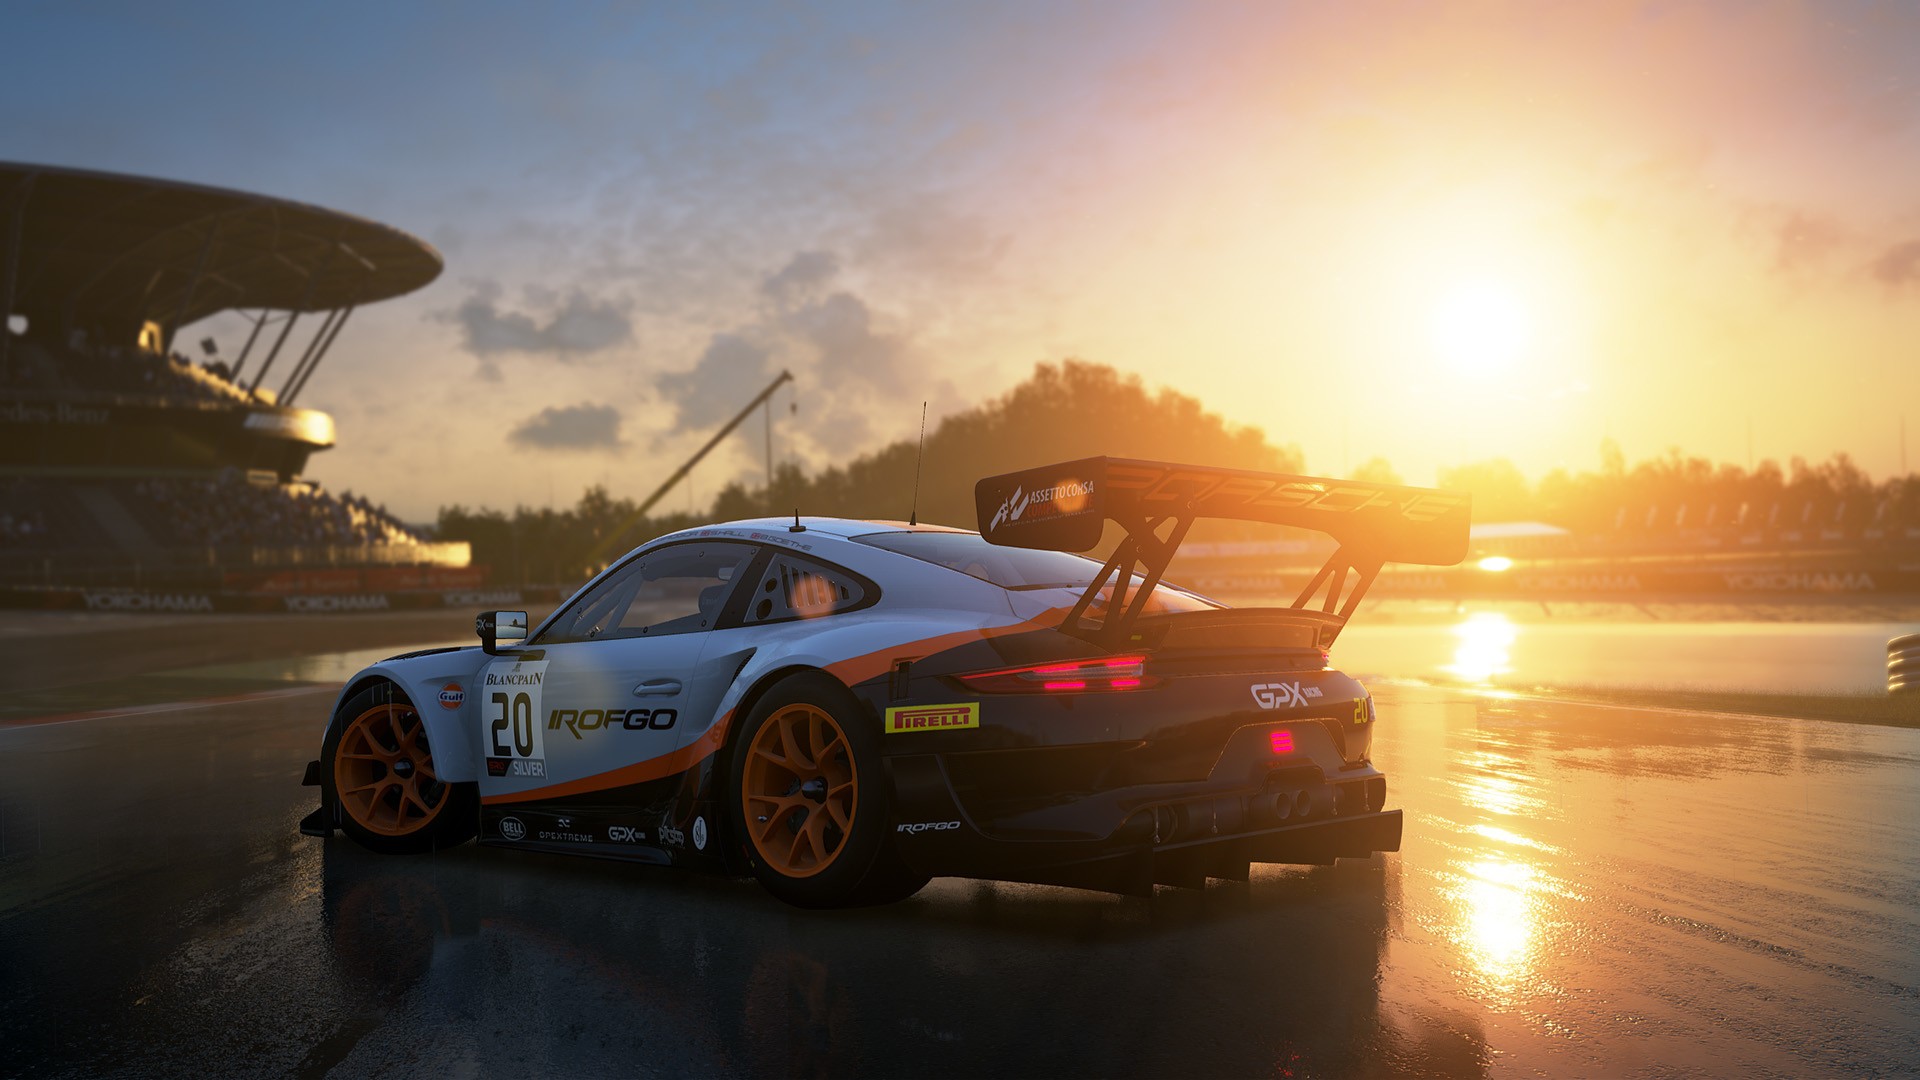 Assetto Corsa Competizione Free To Play This Weekend With A Catch